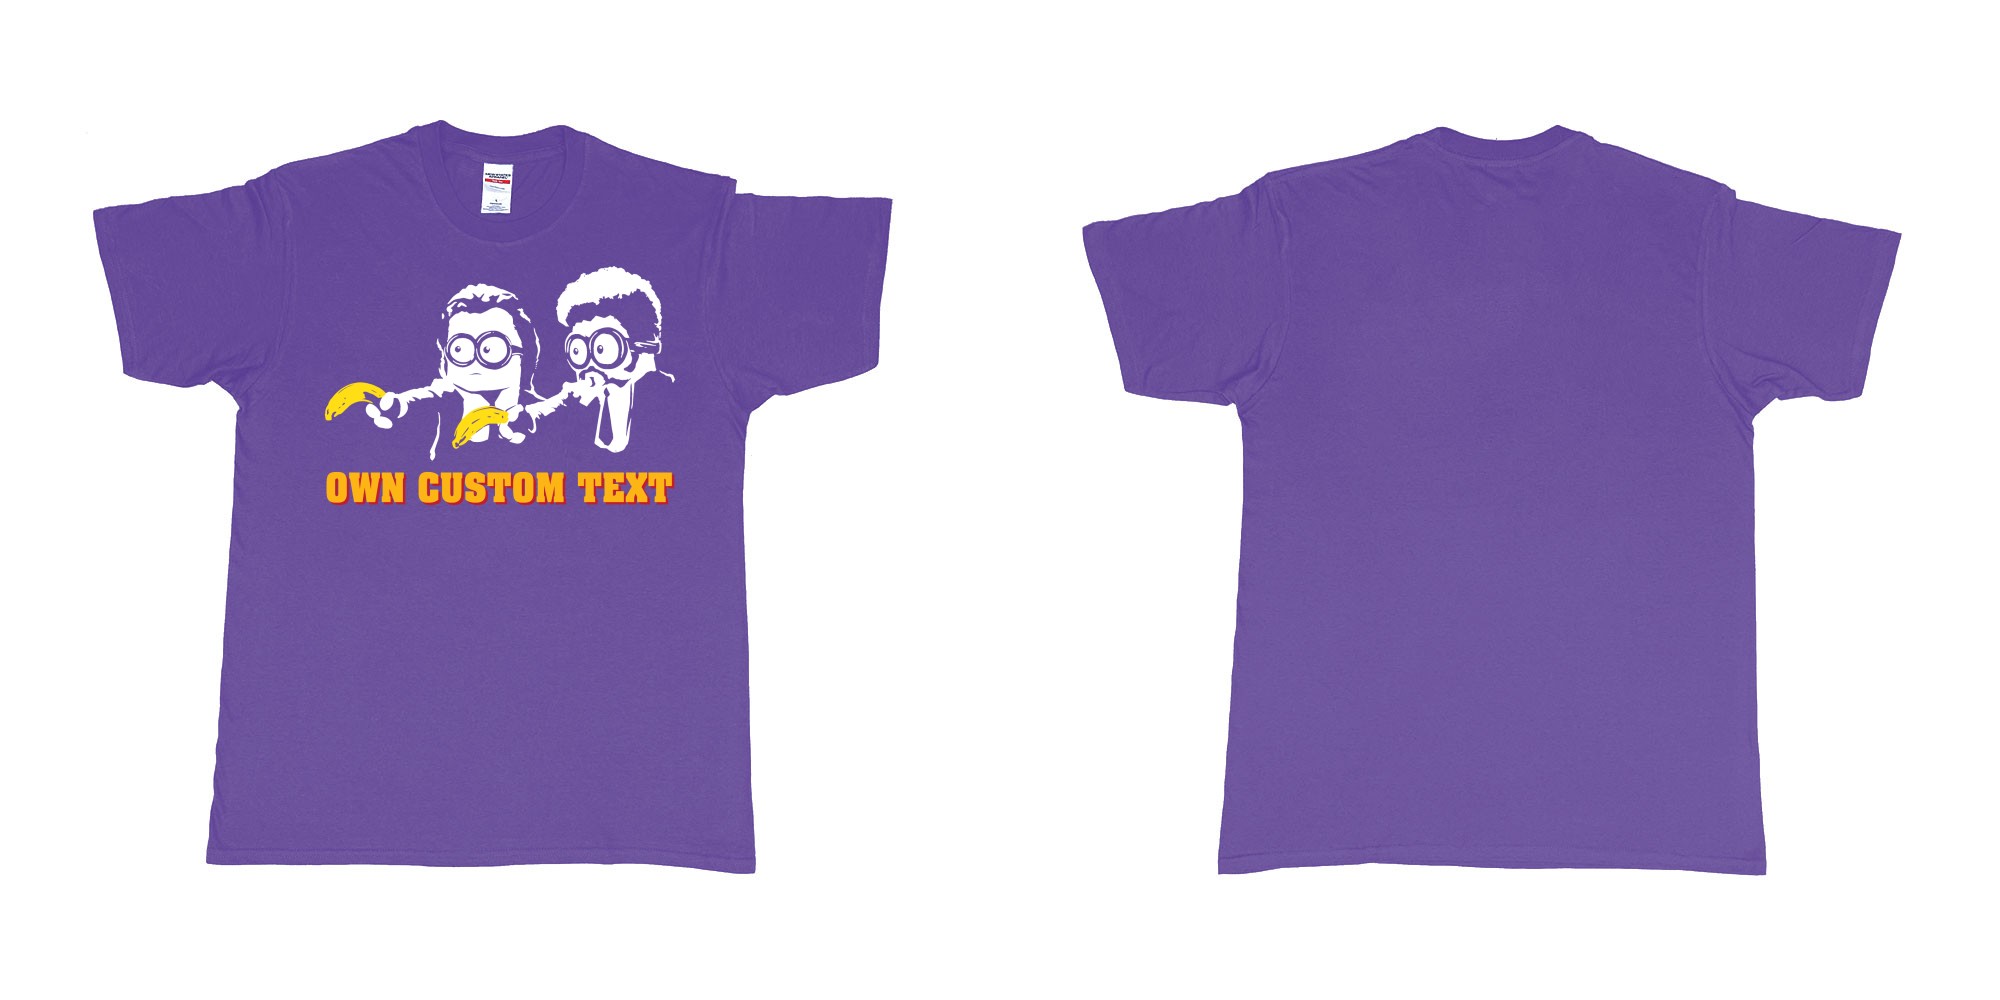 Custom tshirt design minions pulp fiction in fabric color purple choice your own text made in Bali by The Pirate Way